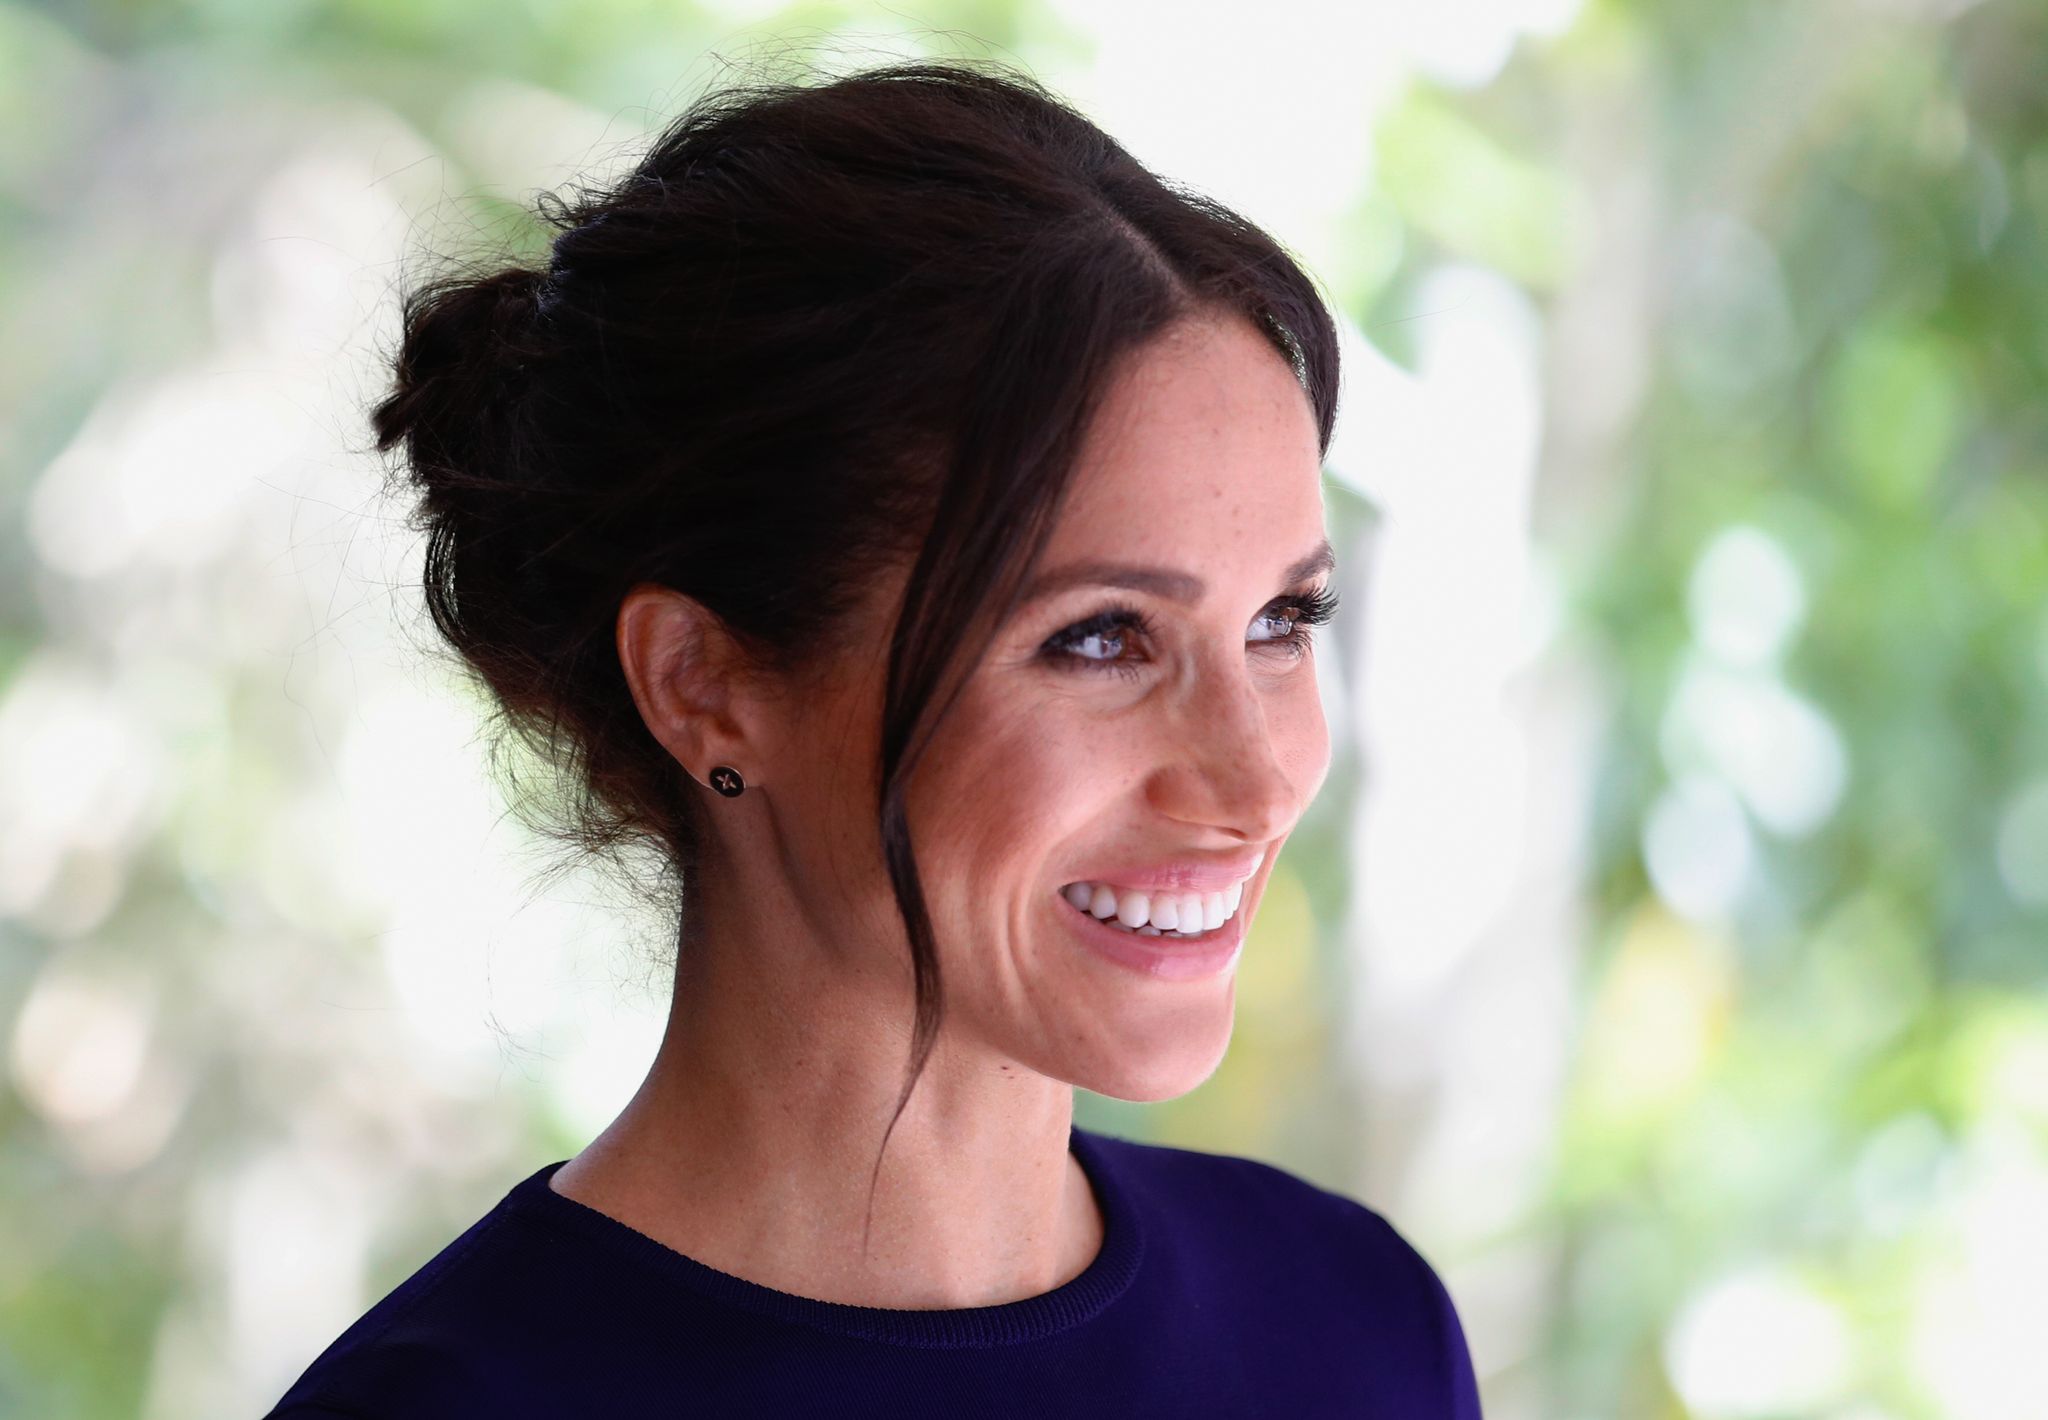 Did Meghan Markle vote in the US midterm elections?